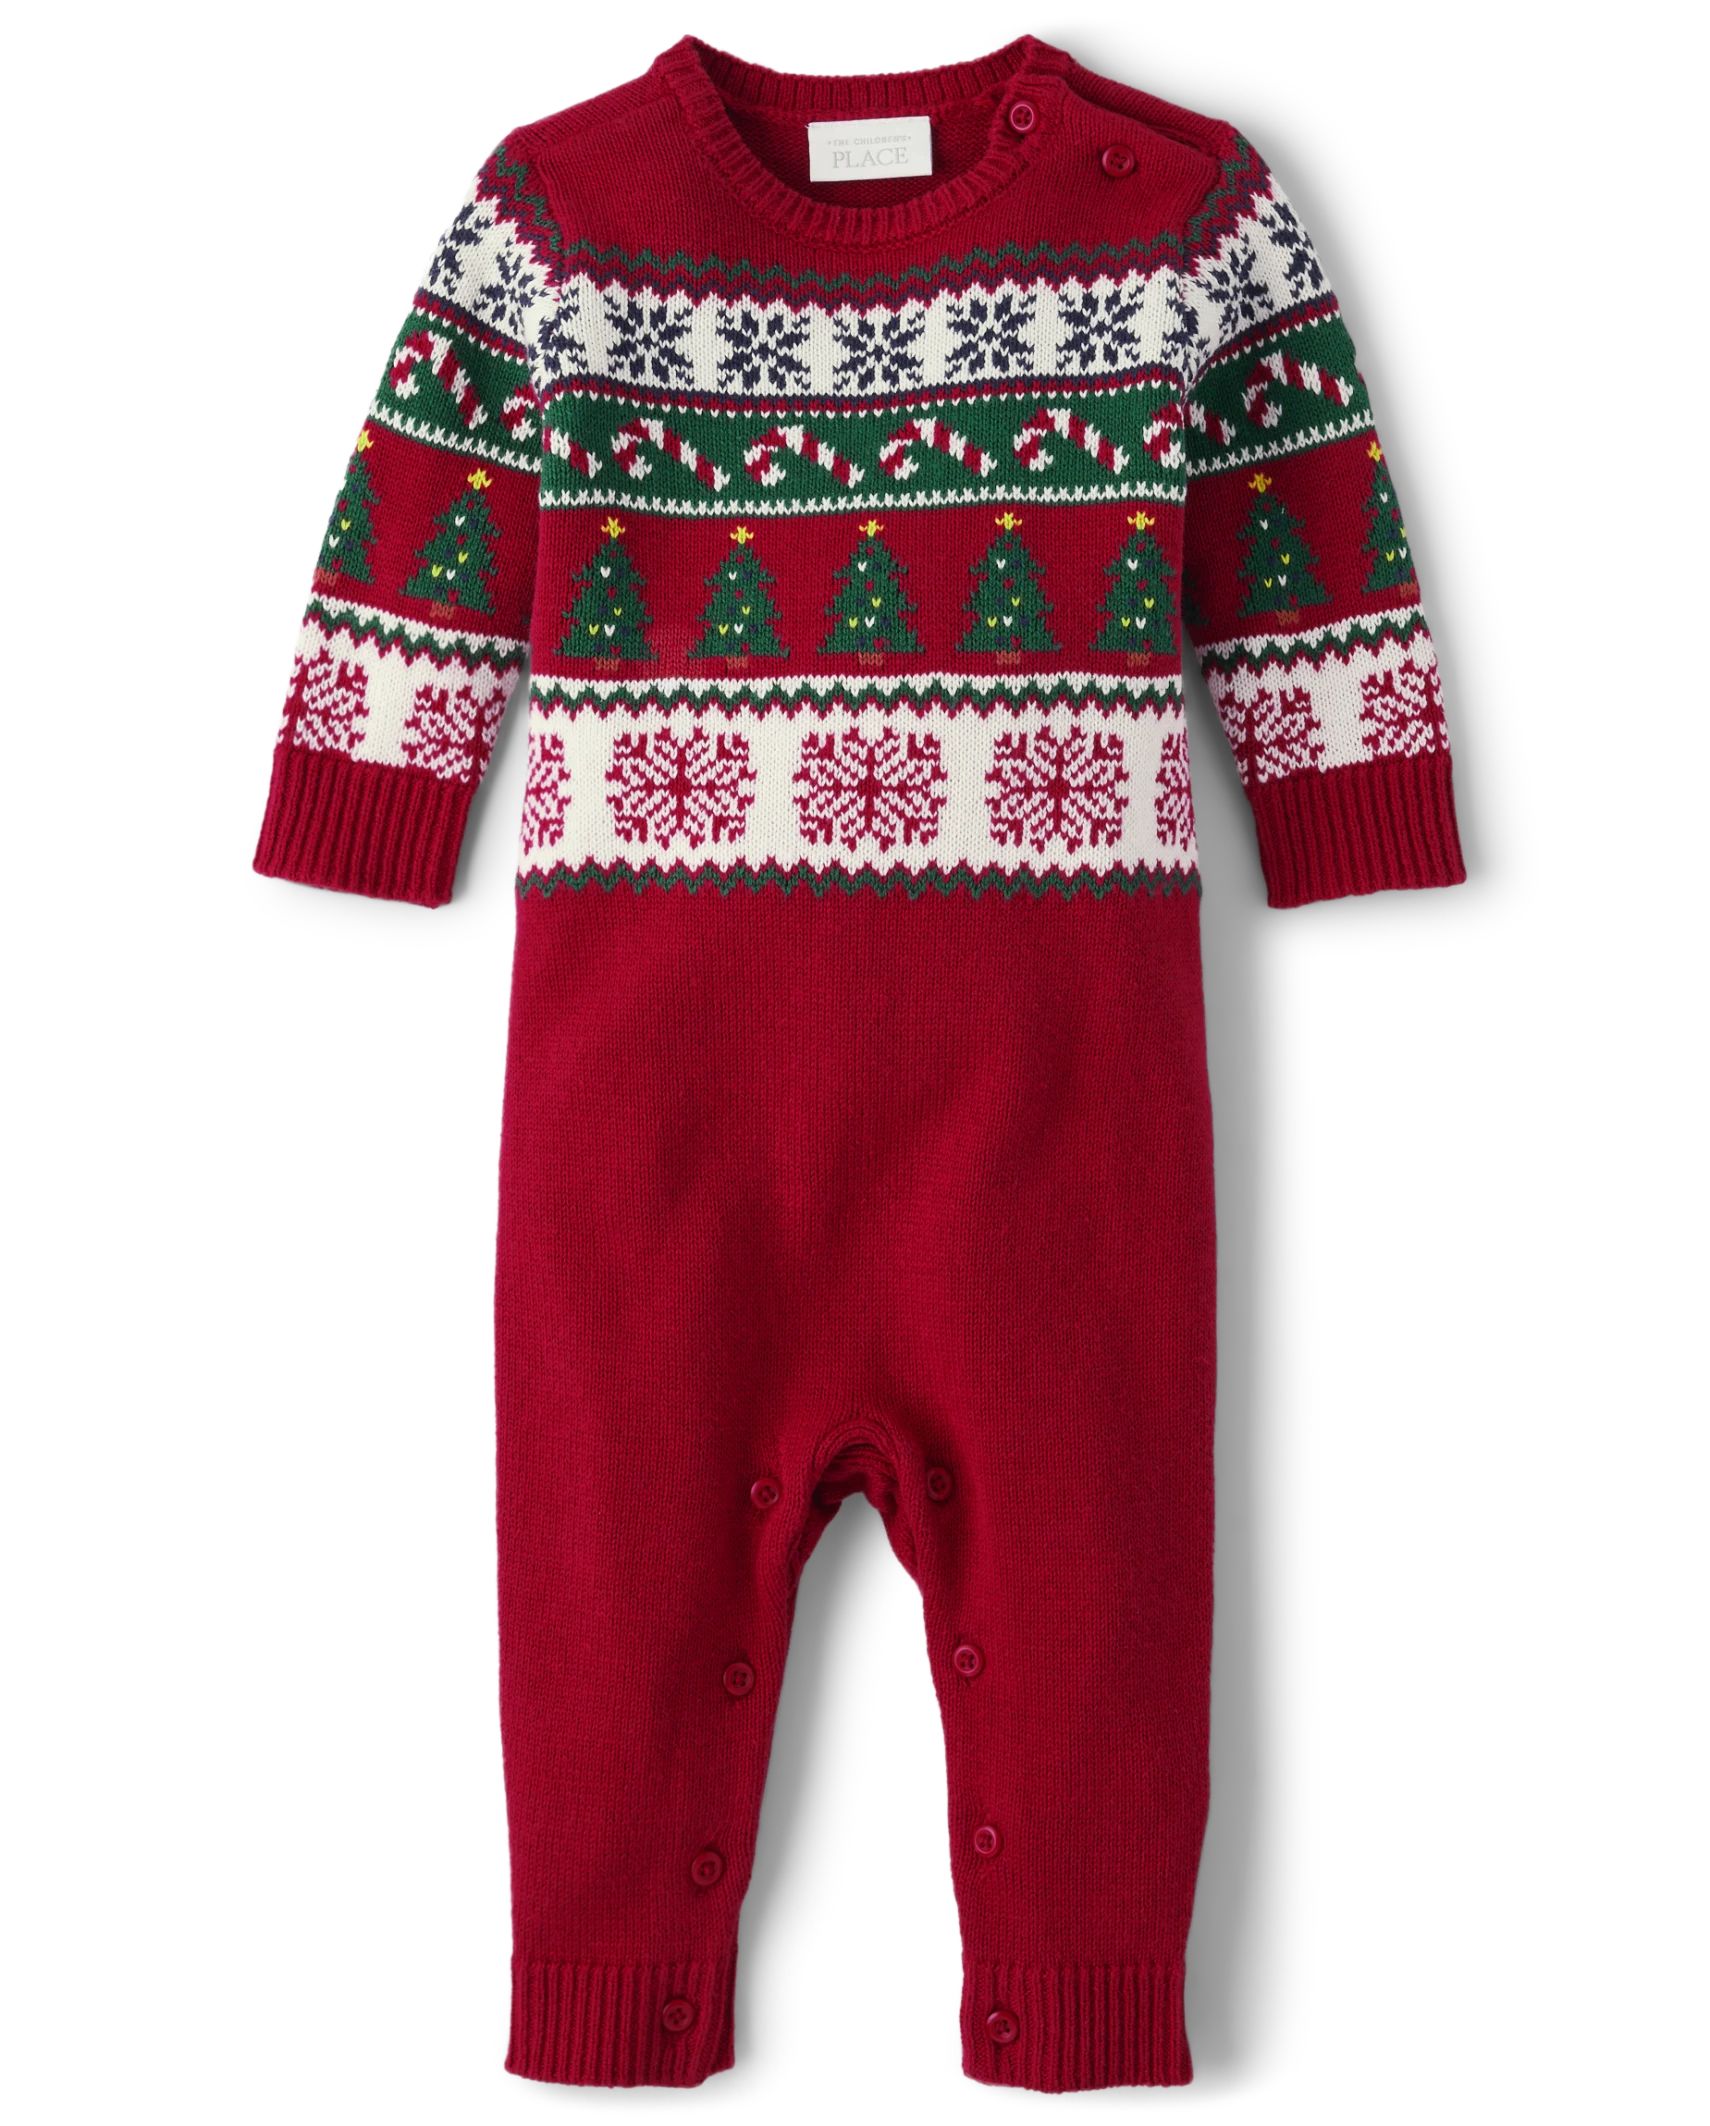 Unisex Baby Matching Family Christmas Fairisle Sweater Romper - classicred | The Children's Place